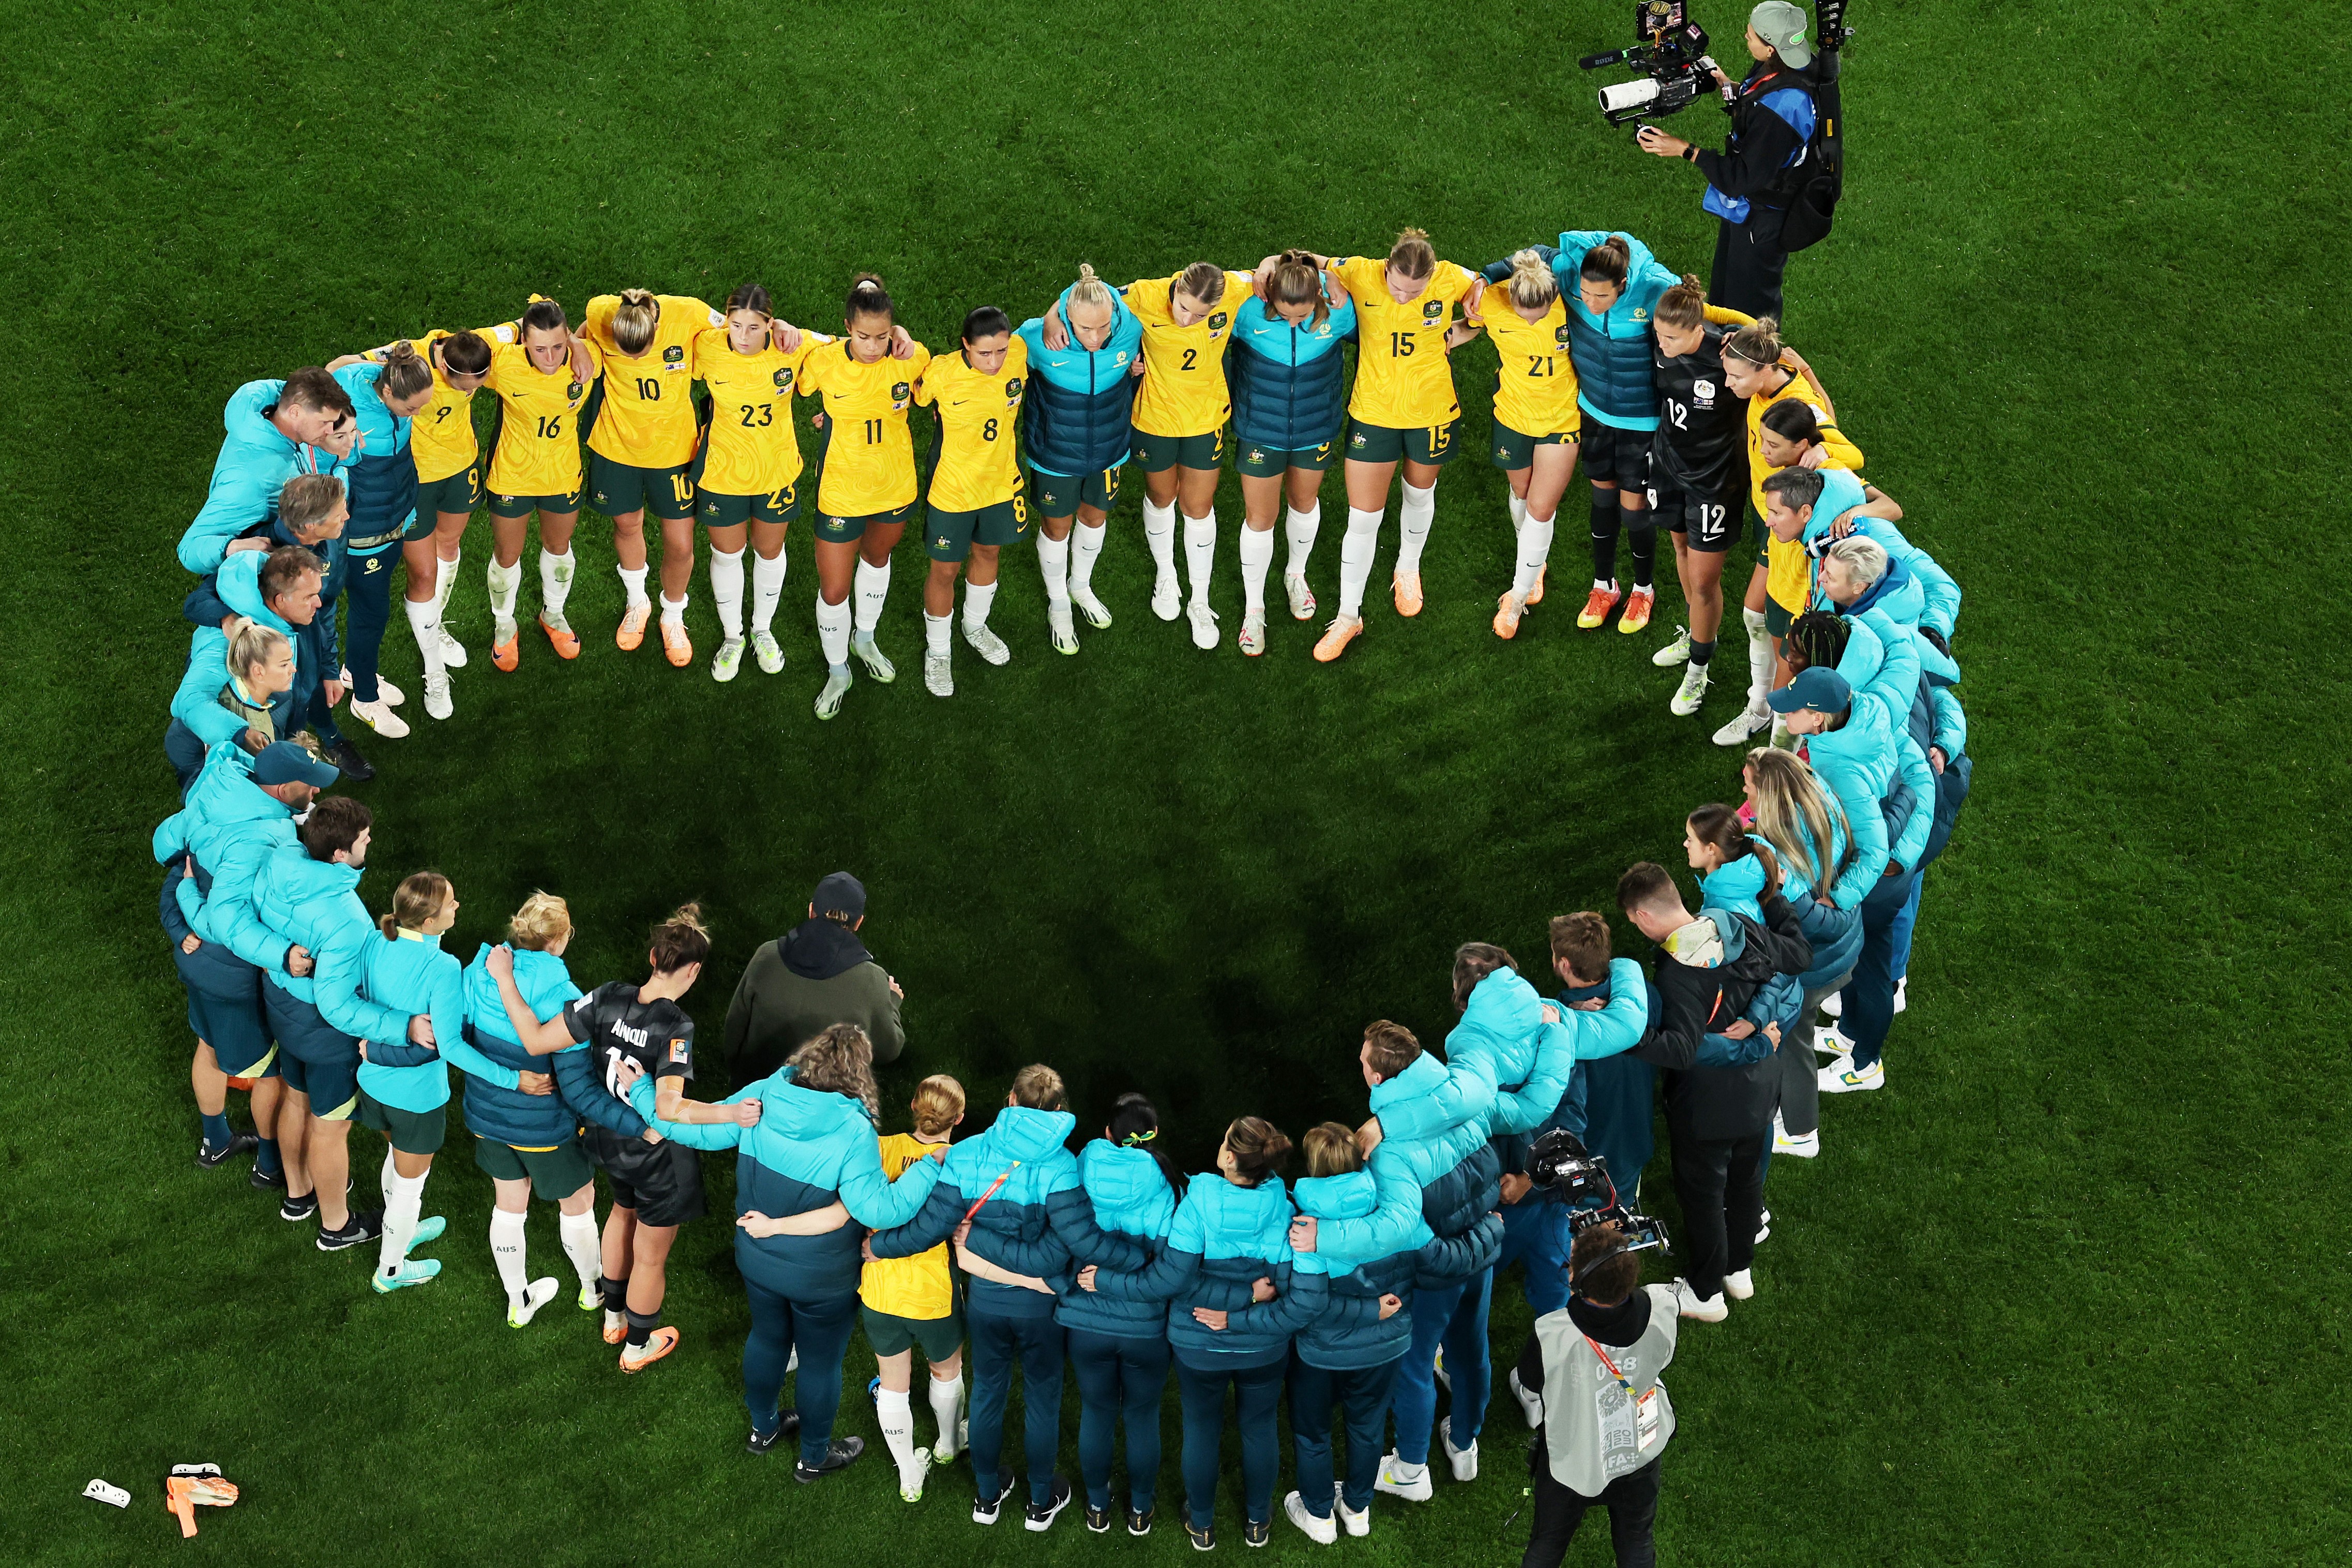 The Matildas come together in the shape of a heart after their heartbreaking semi-final loss to England in the FIFA Women's World Cup.